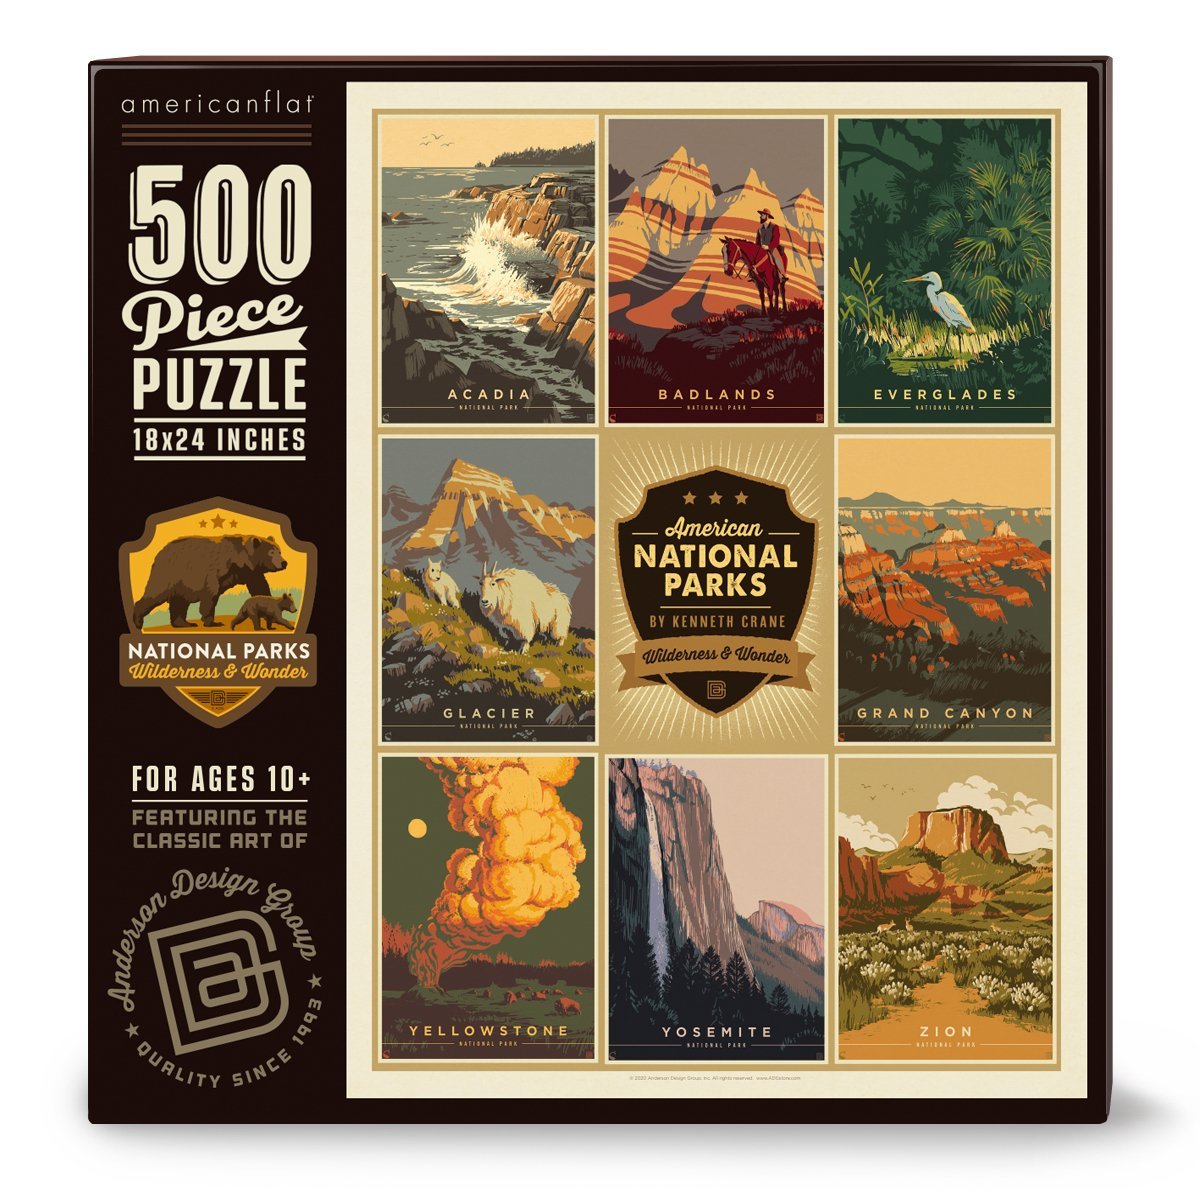 500 Piece Jigsaw Puzzle, 18x24 Inches, "American National Parks 4 " Art by Anderson Design Group - Jigsaw Puzzle - Americanflat